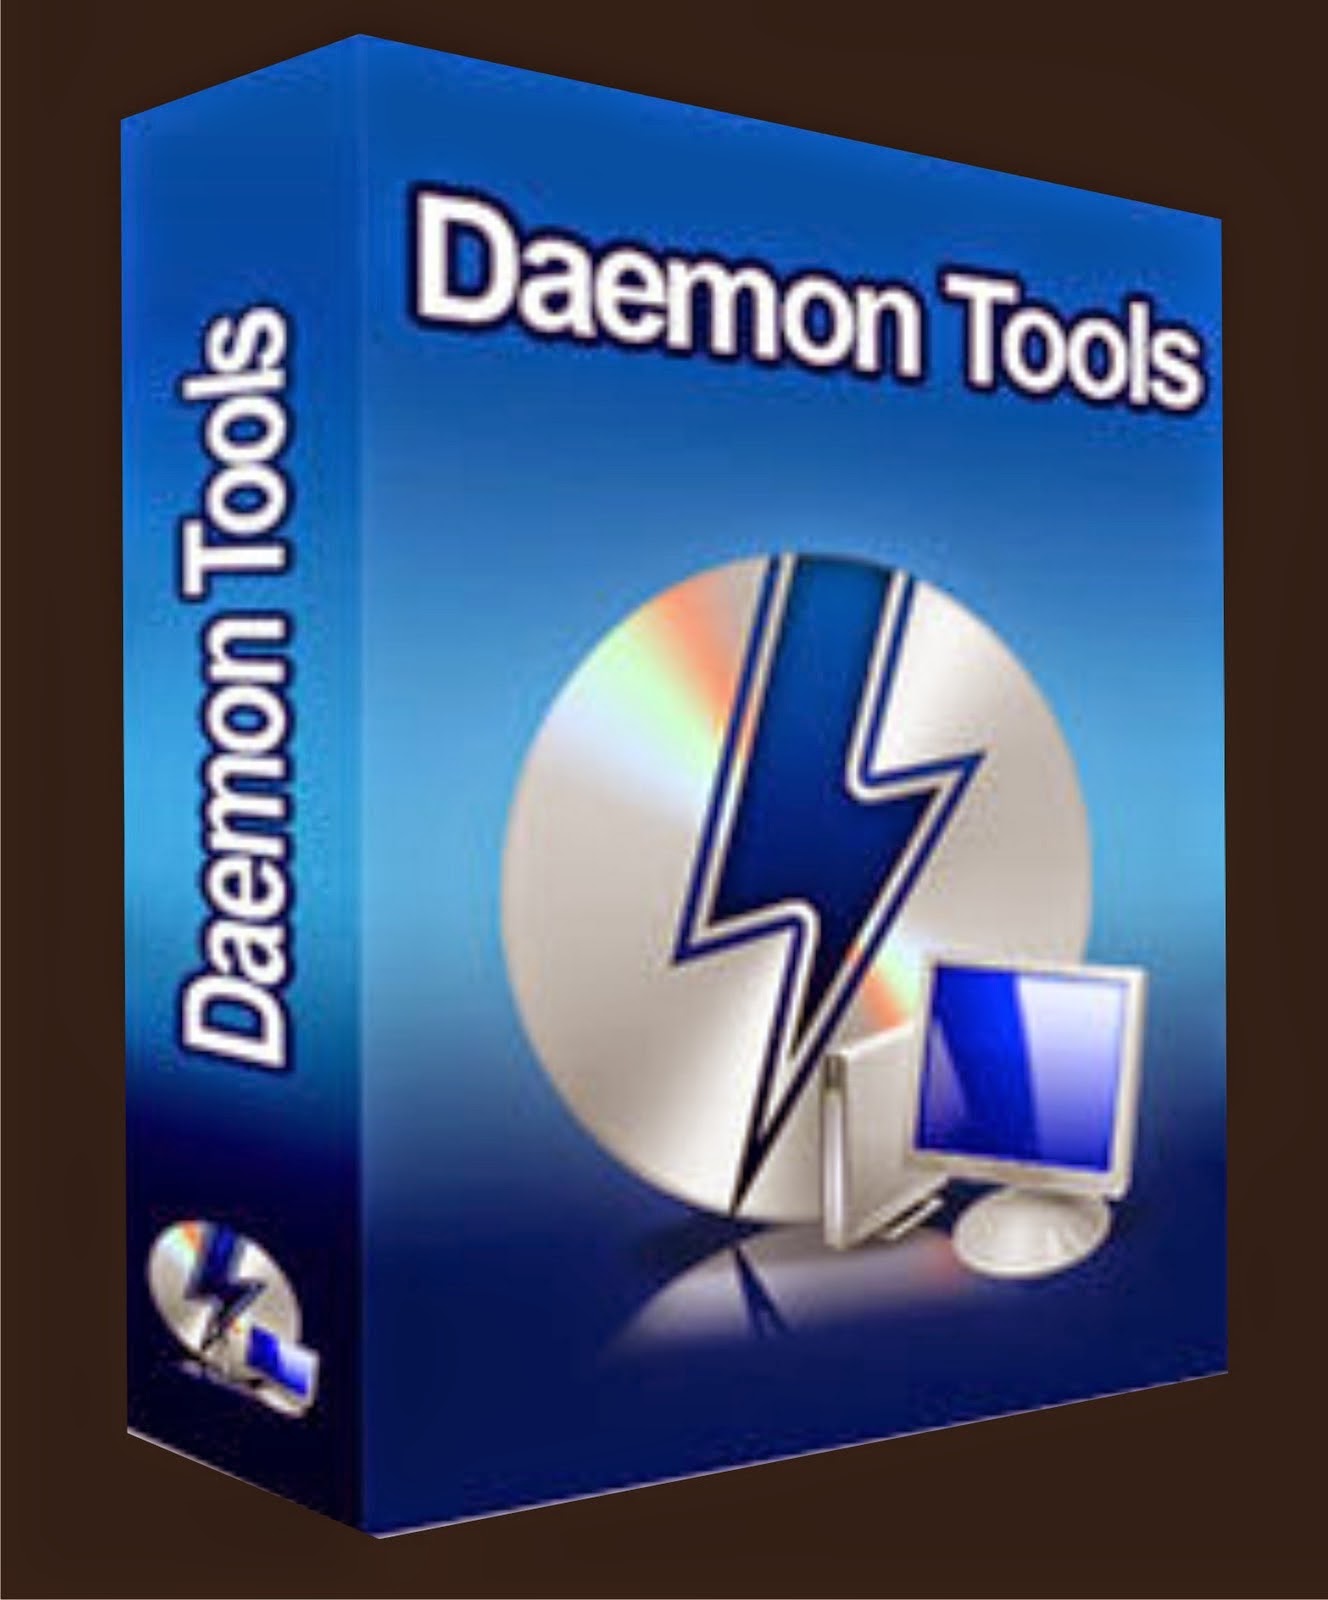 download free daemon tools for windows 8.1